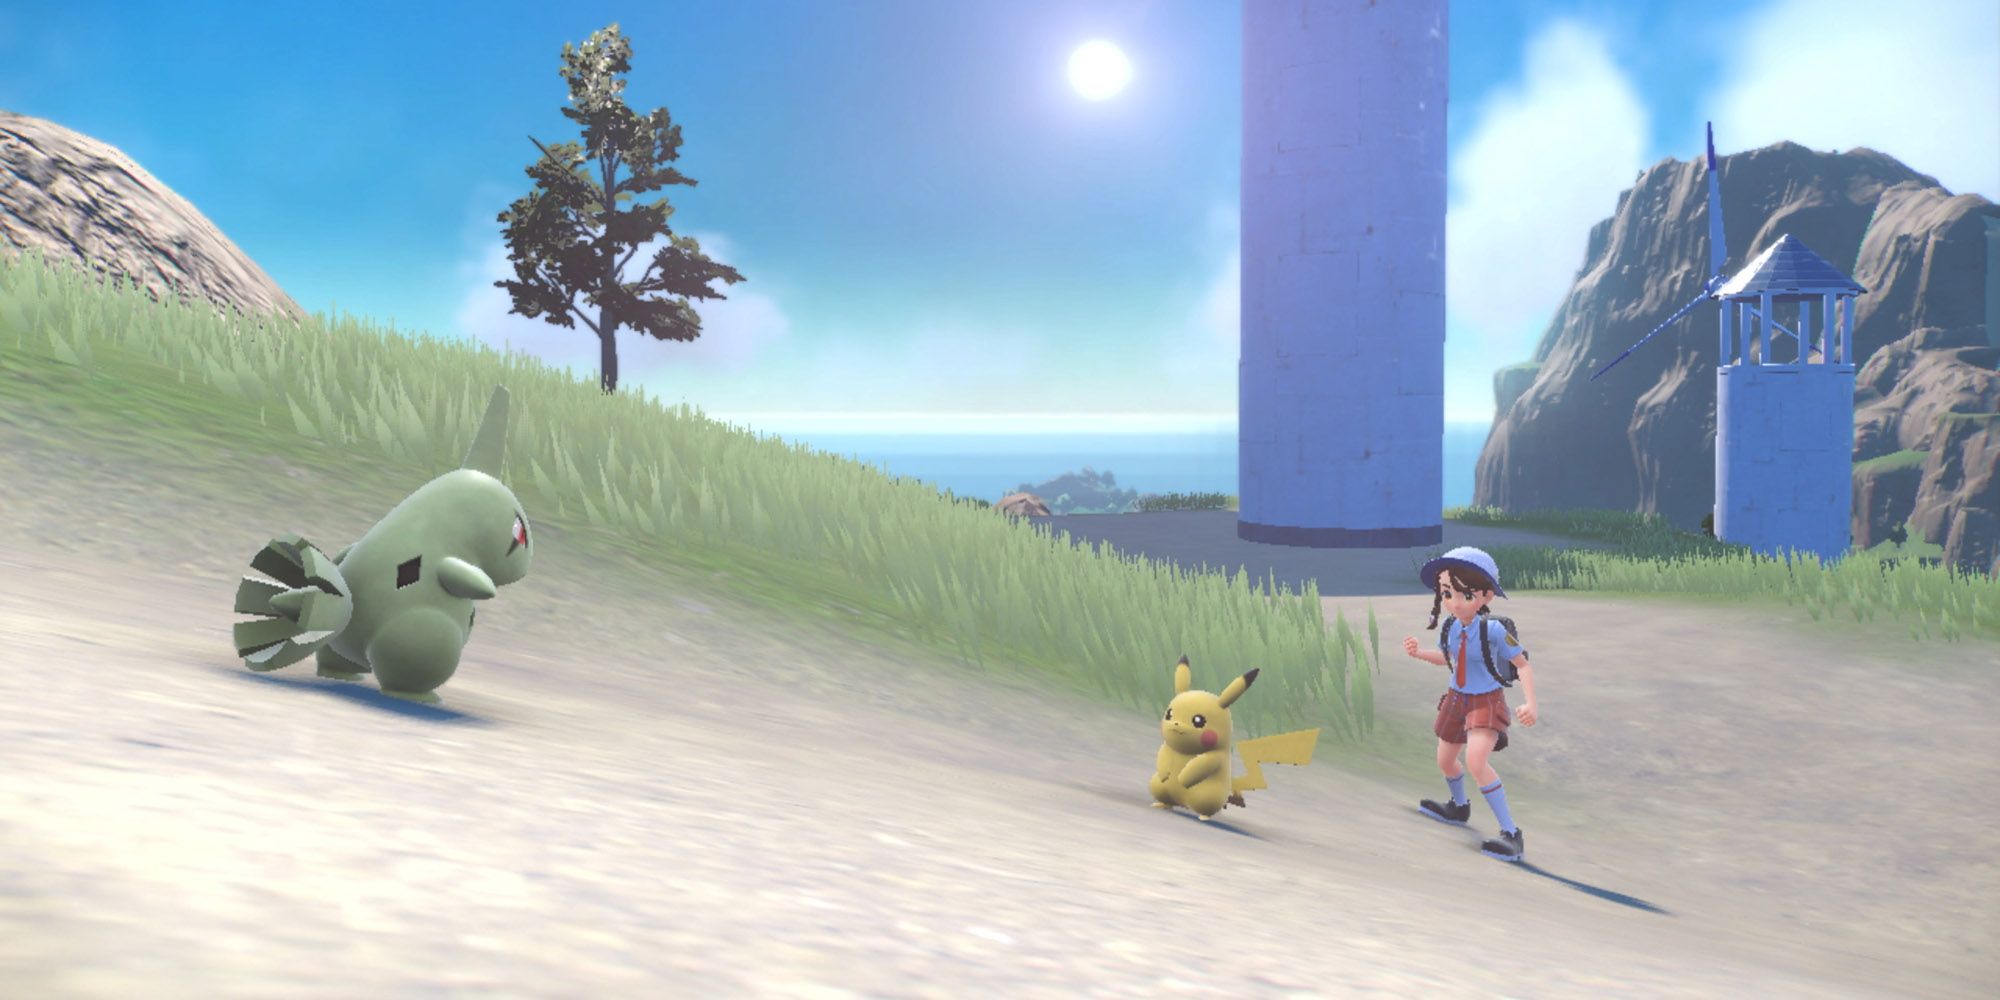 Pokemon Scarlet and Violet - Trainer and Pikachu approach a Pokemon for a Wild Battle